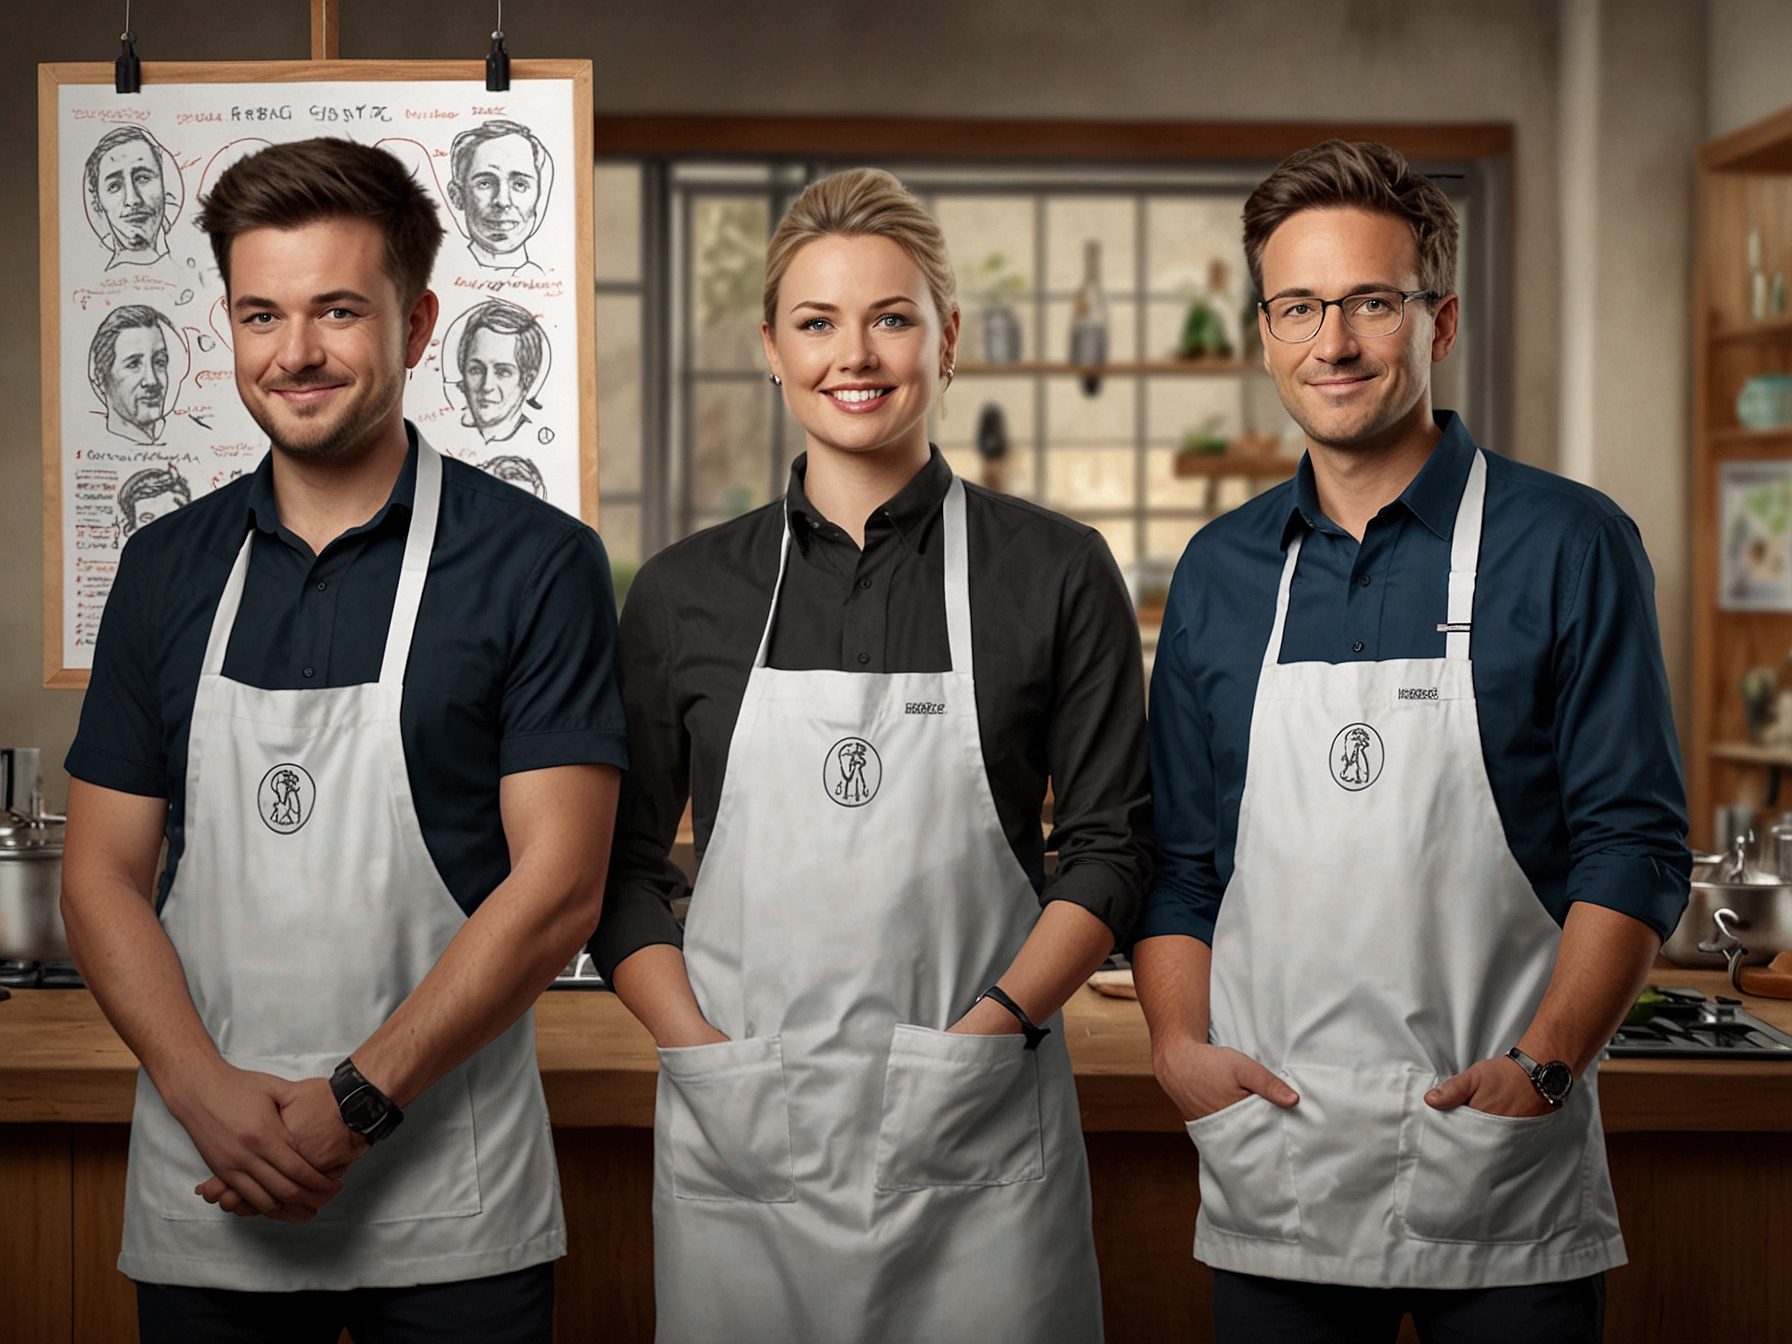 Viewers' reactions on social media showcasing tweets about the 'cruel' MasterChef Australia pressure test, with comments highlighting the stress and emotional toll it took on the participants.